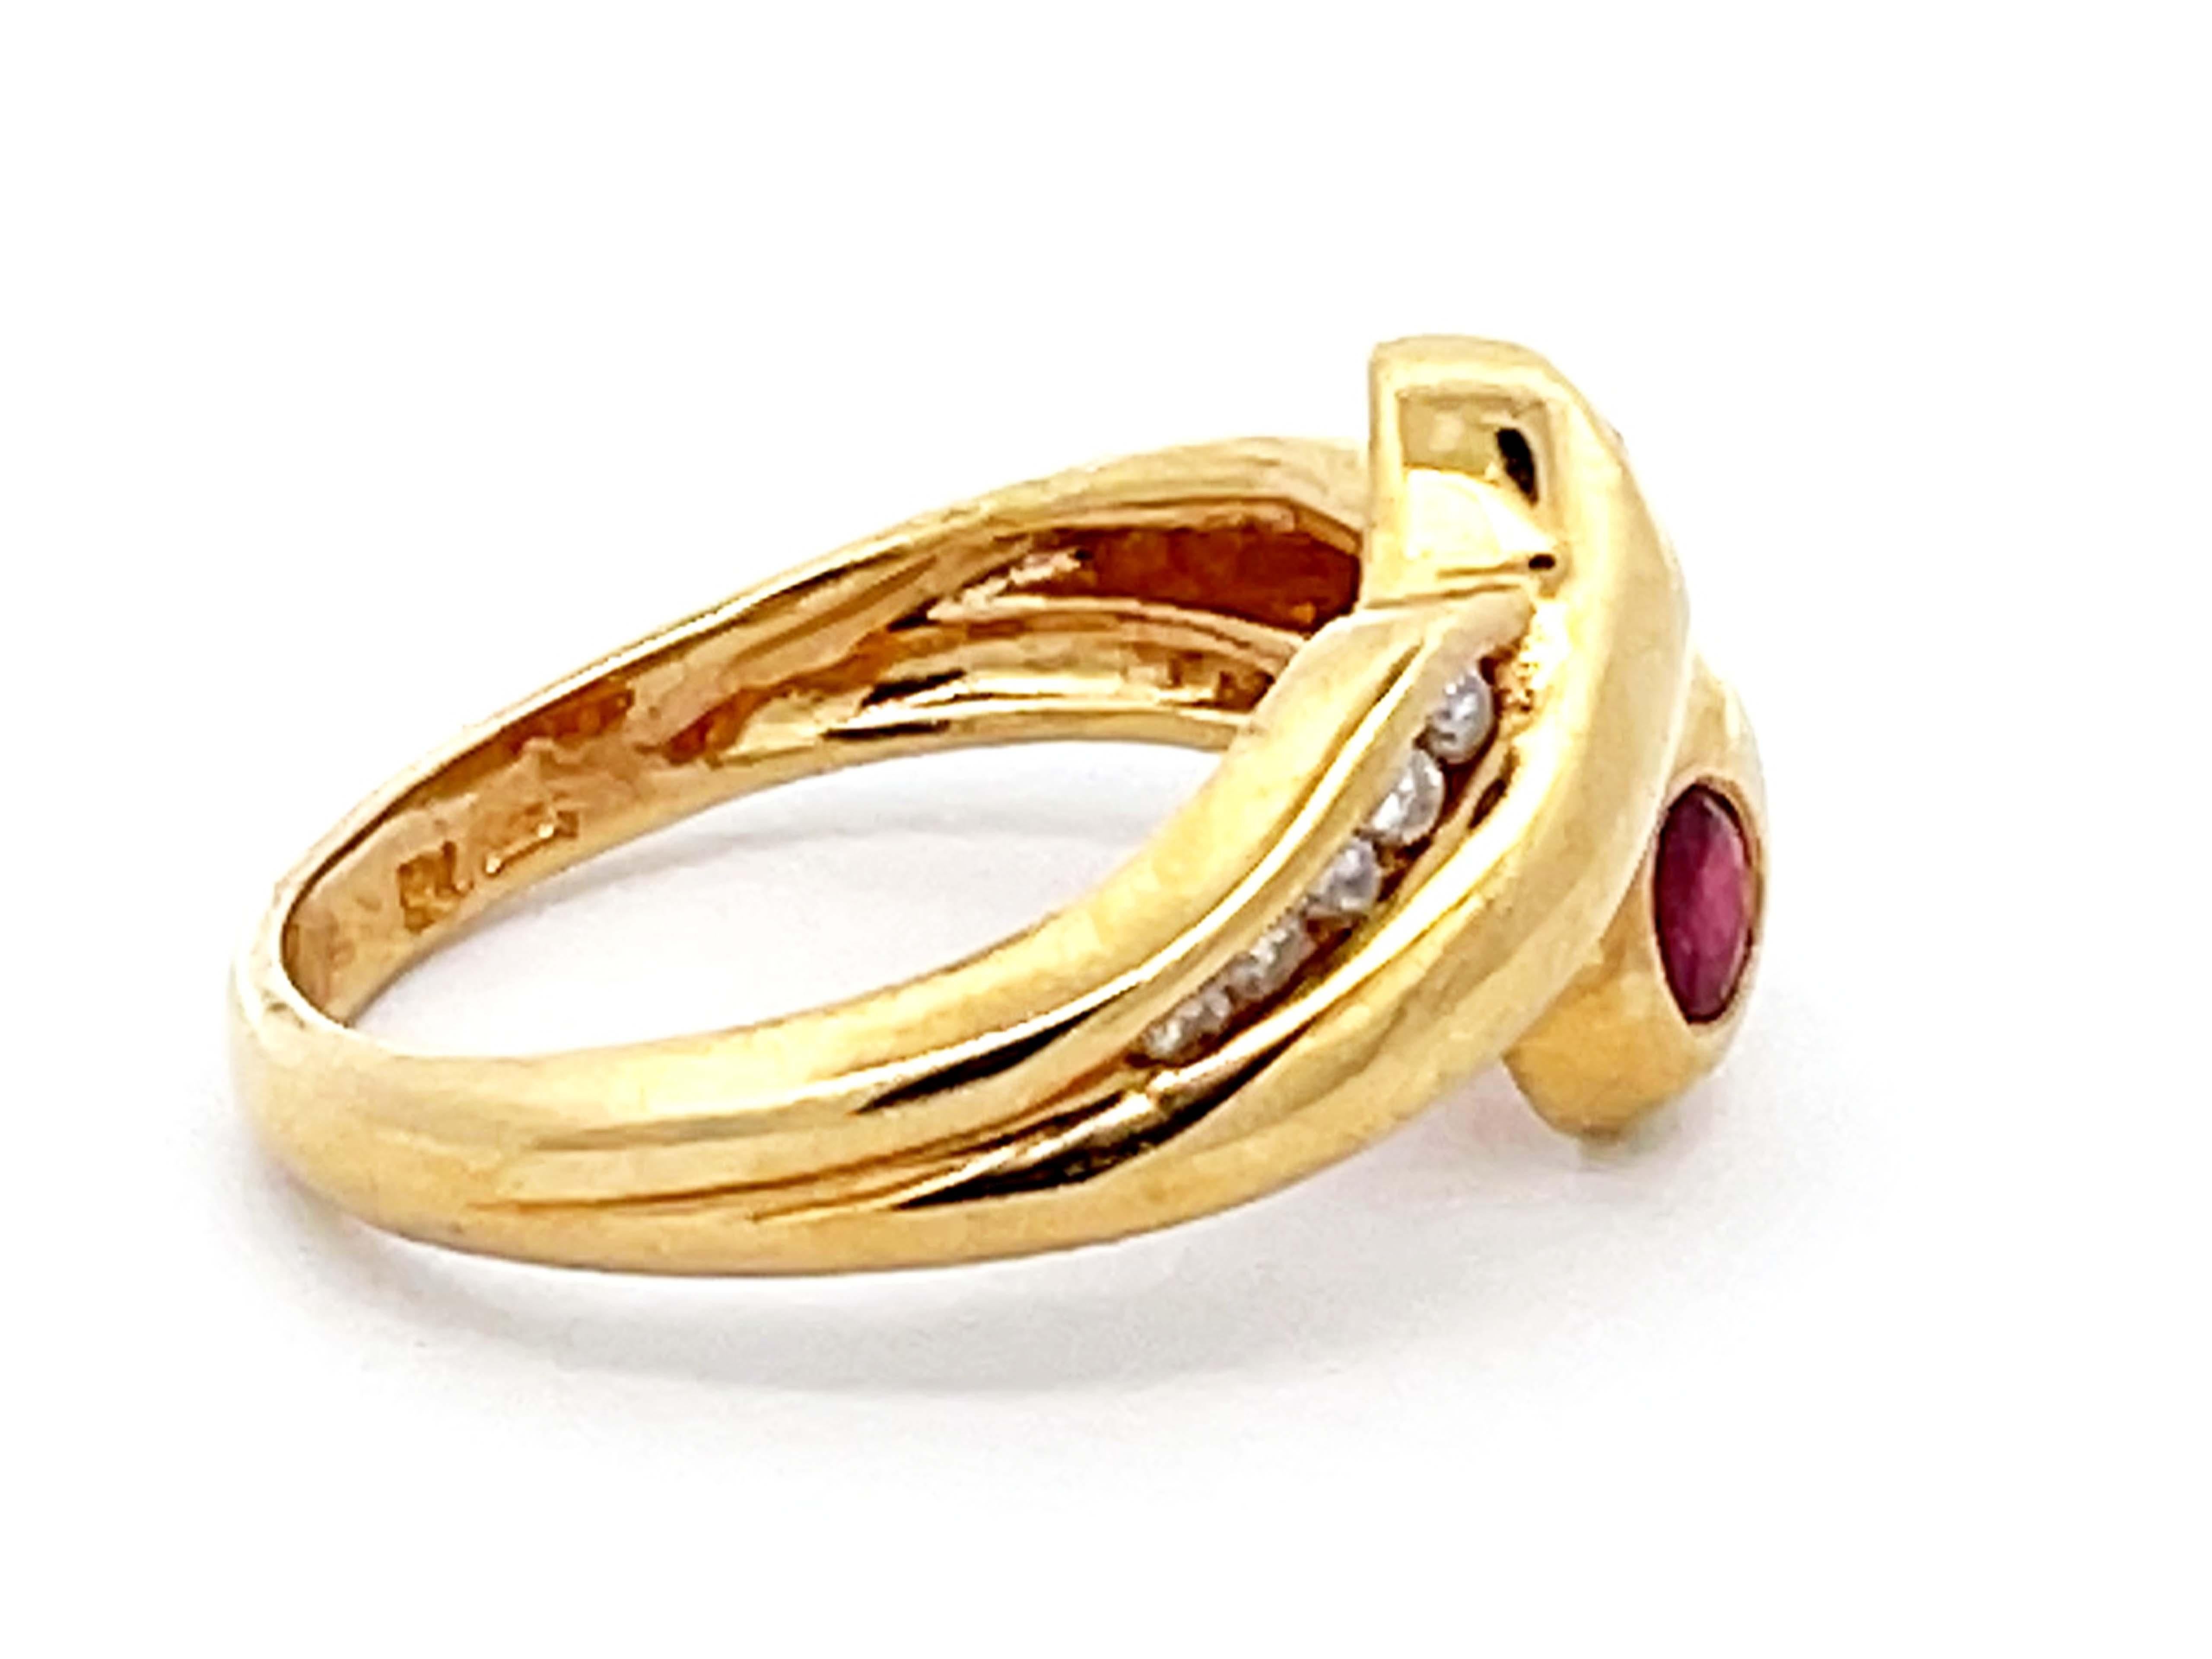 Vintage Ruby and Diamond Ring in 14k Yellow Gold In Excellent Condition For Sale In Honolulu, HI